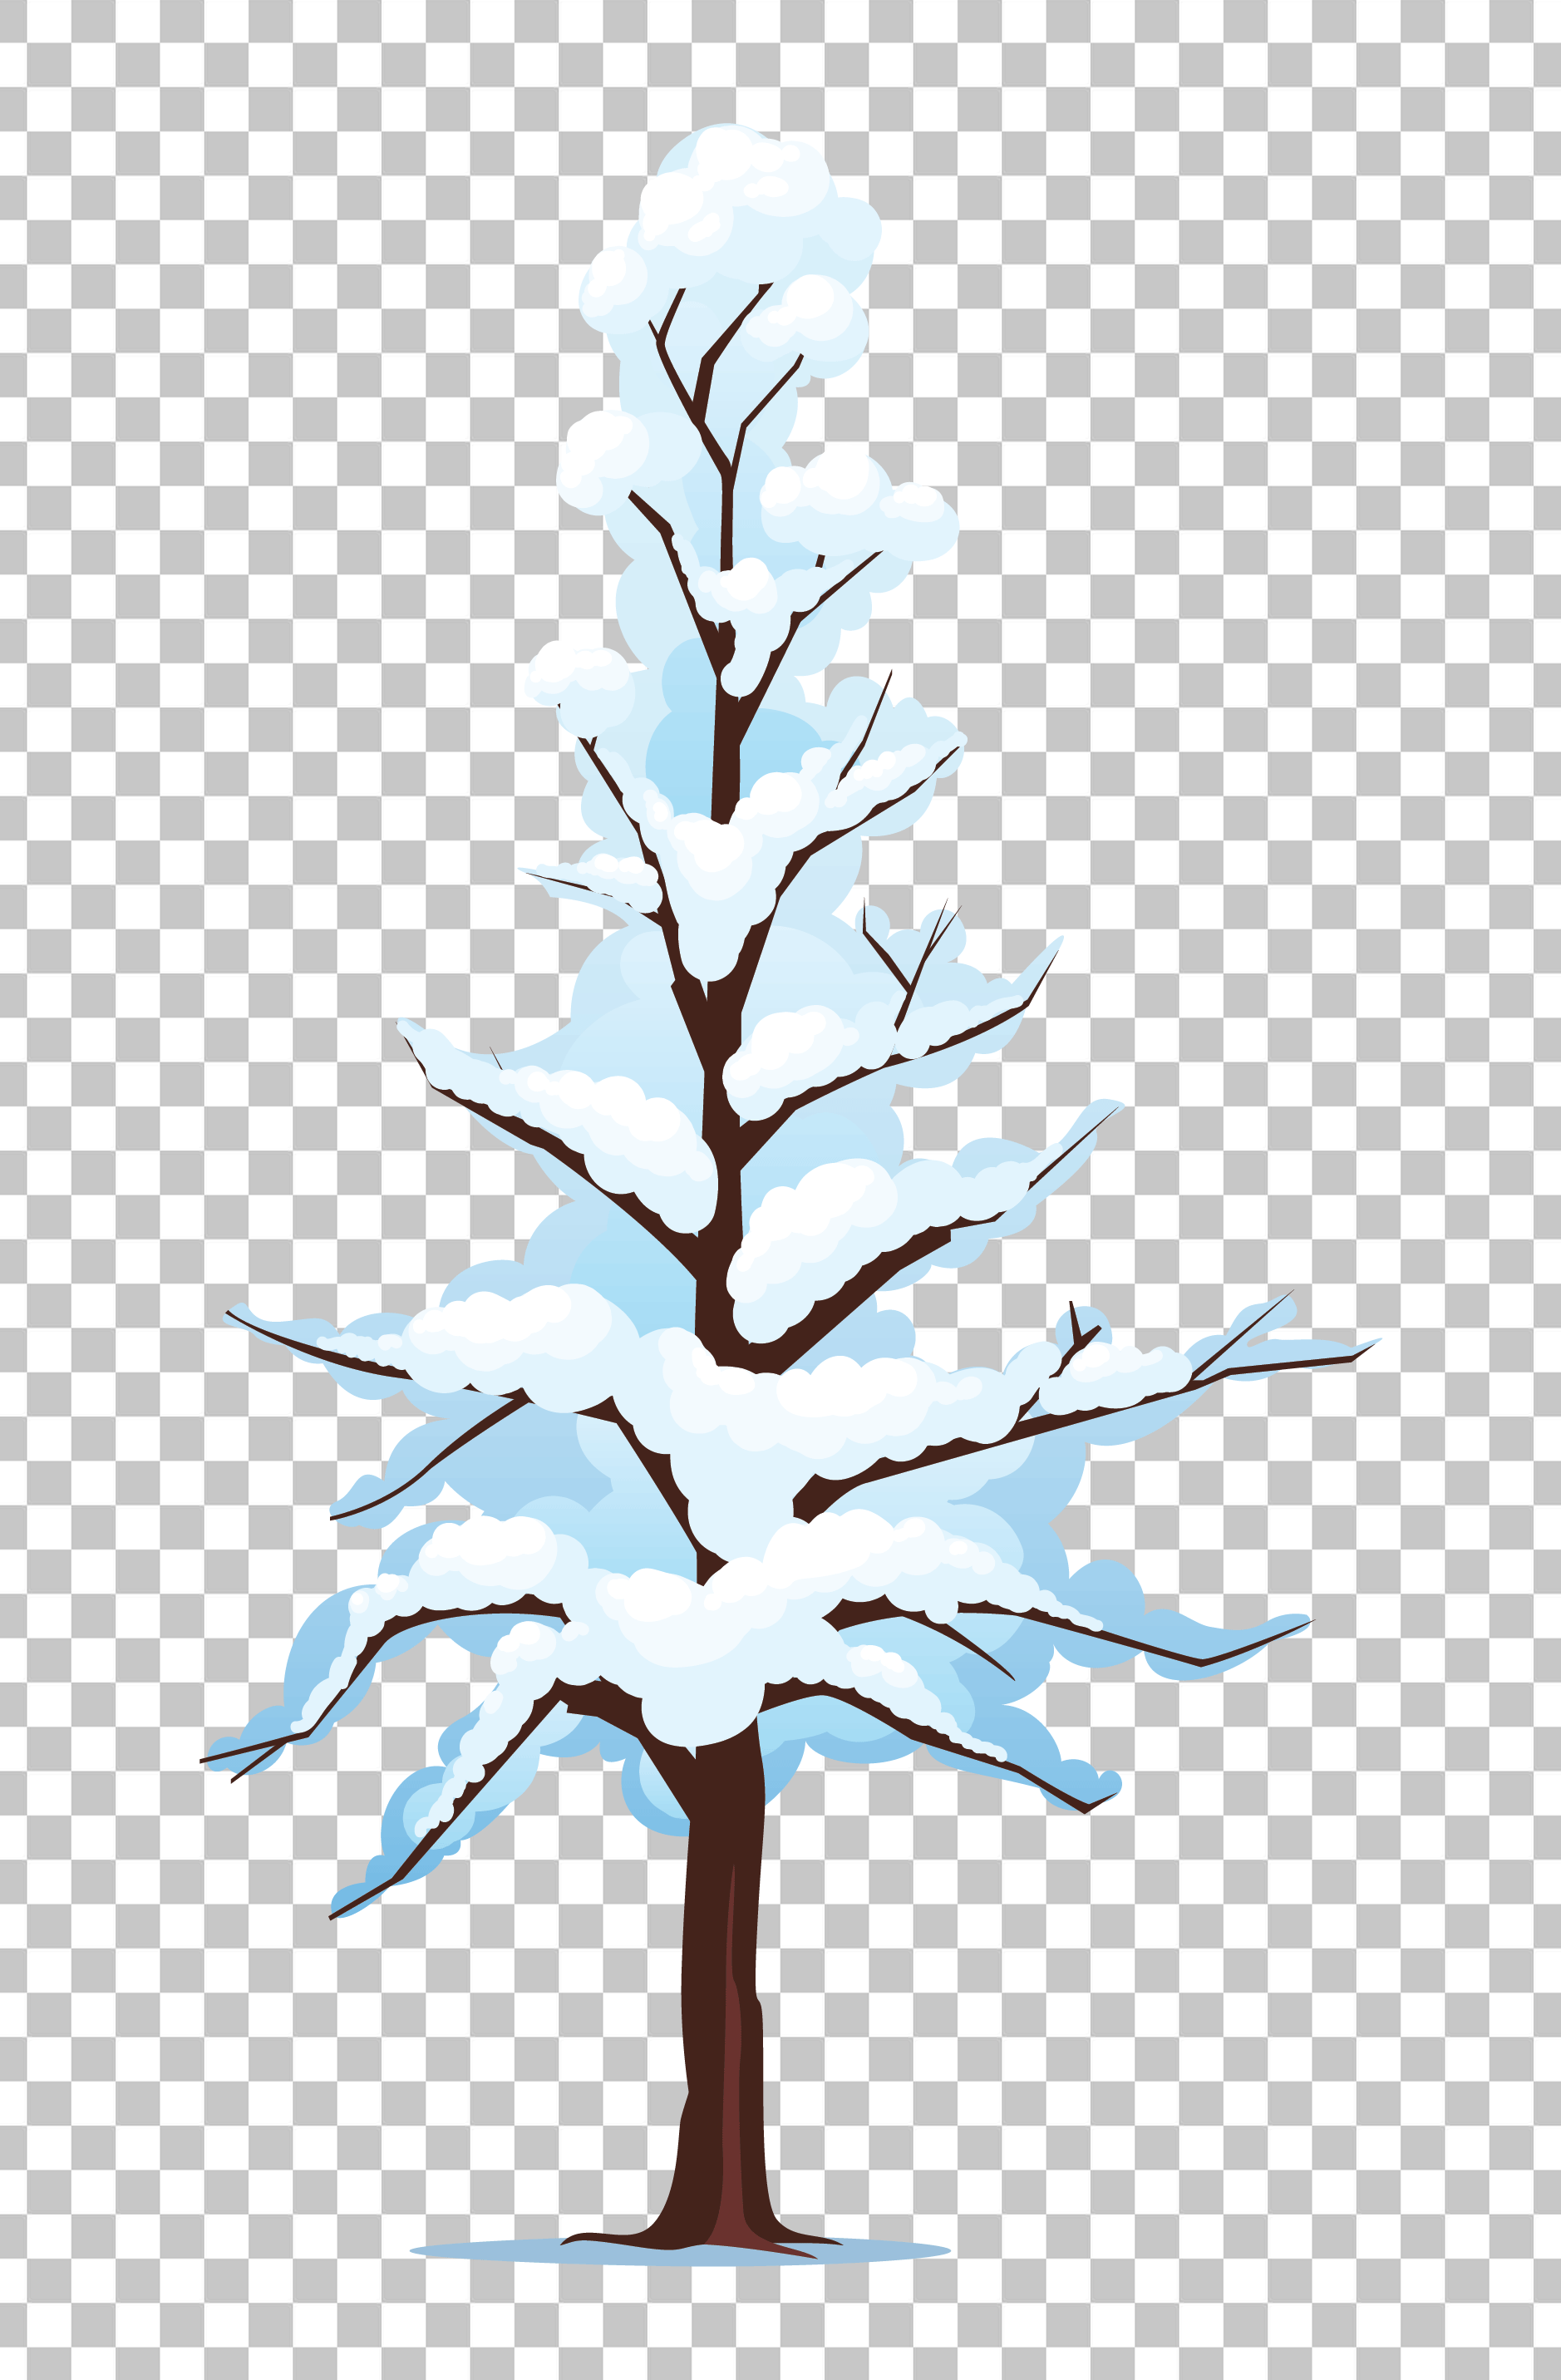 Snow Covered Pine Tree PNG Image